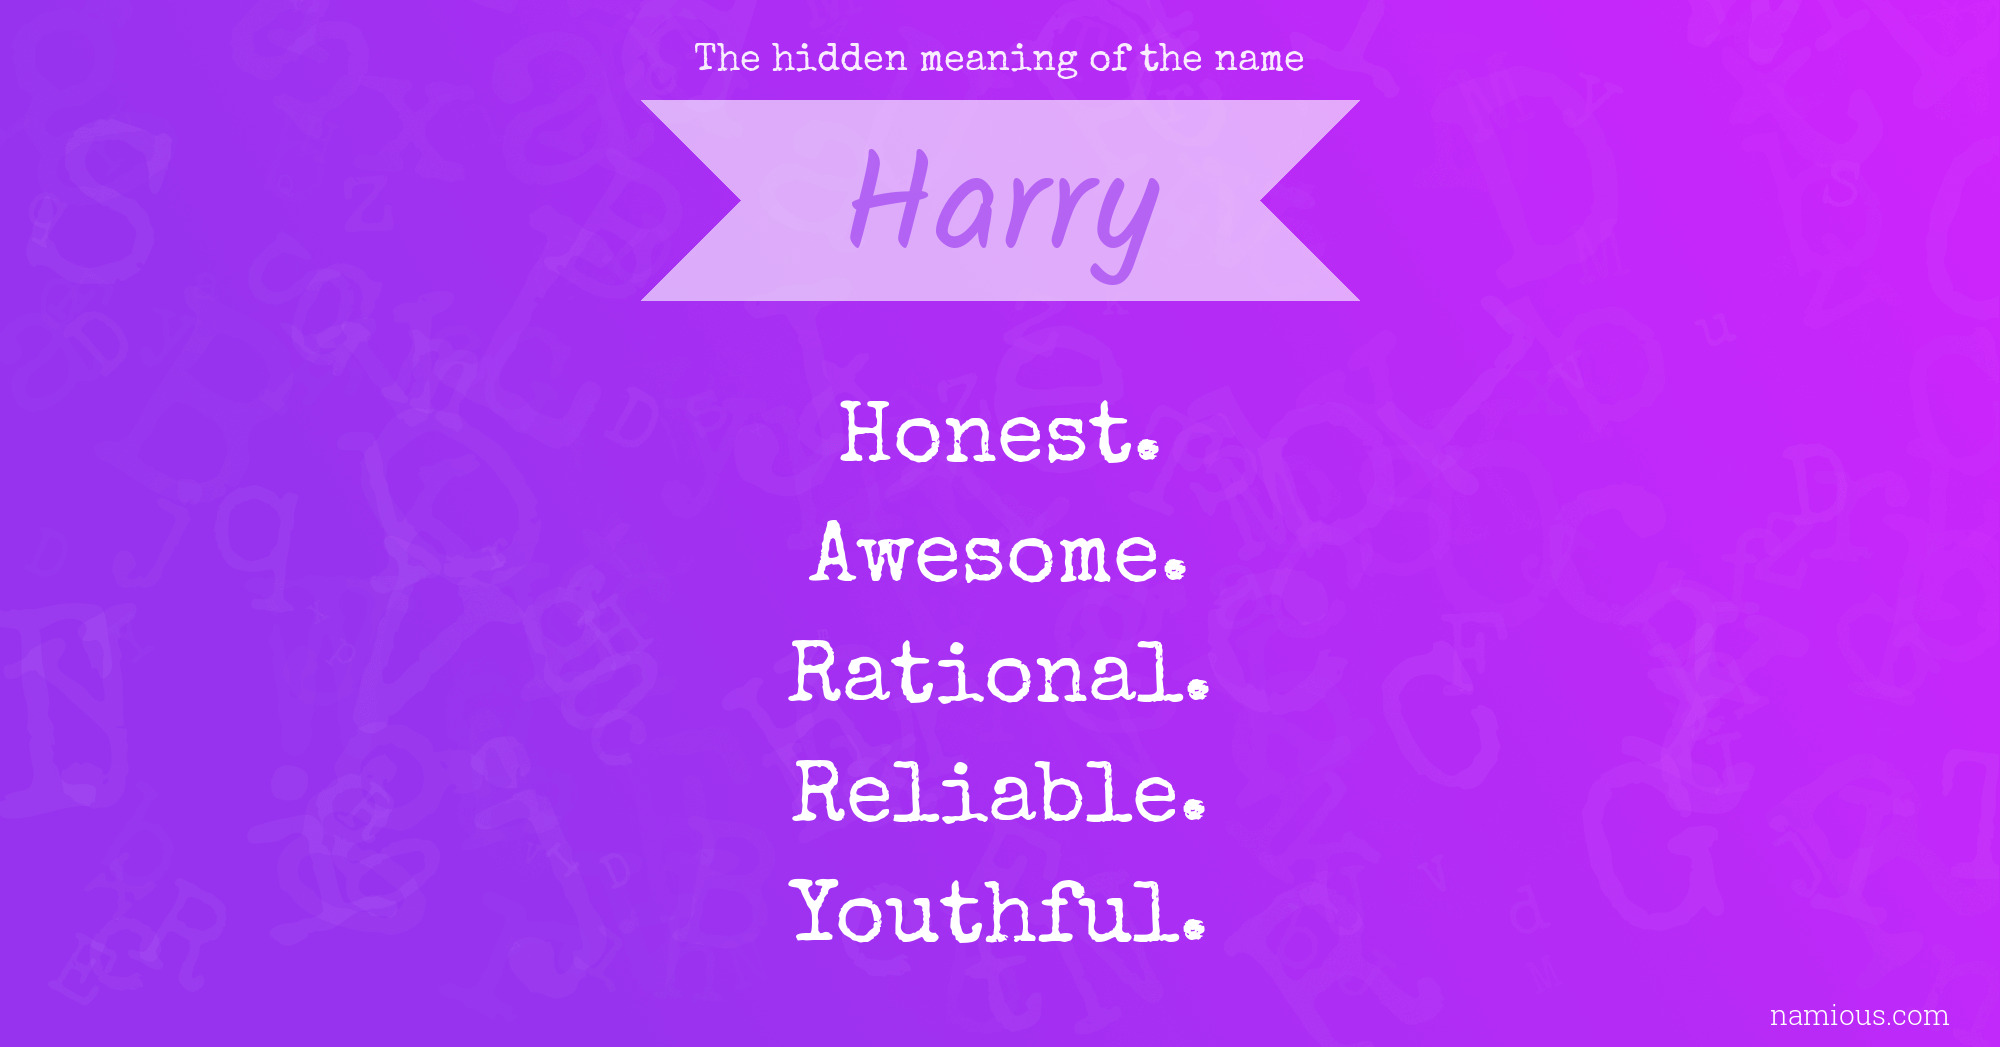 The hidden meaning of the name Harry